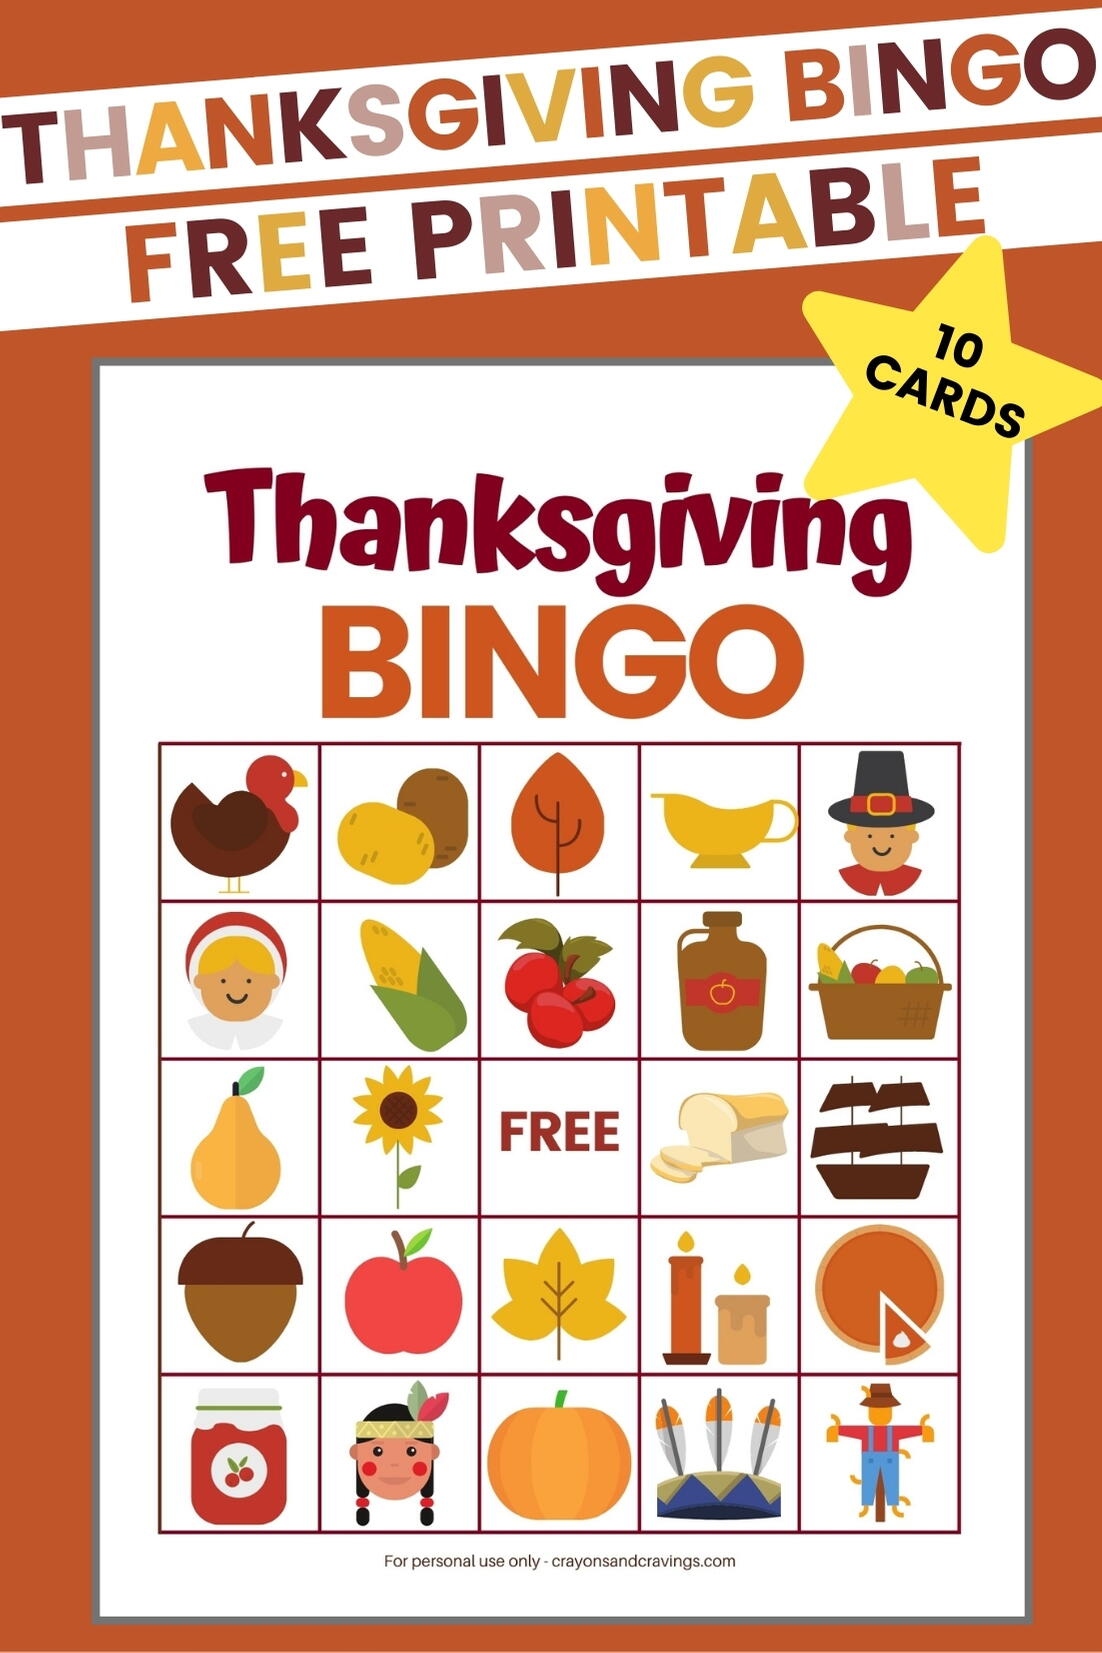 free-games-print-and-play-english-with-kids-word-scramble-puzzles-to